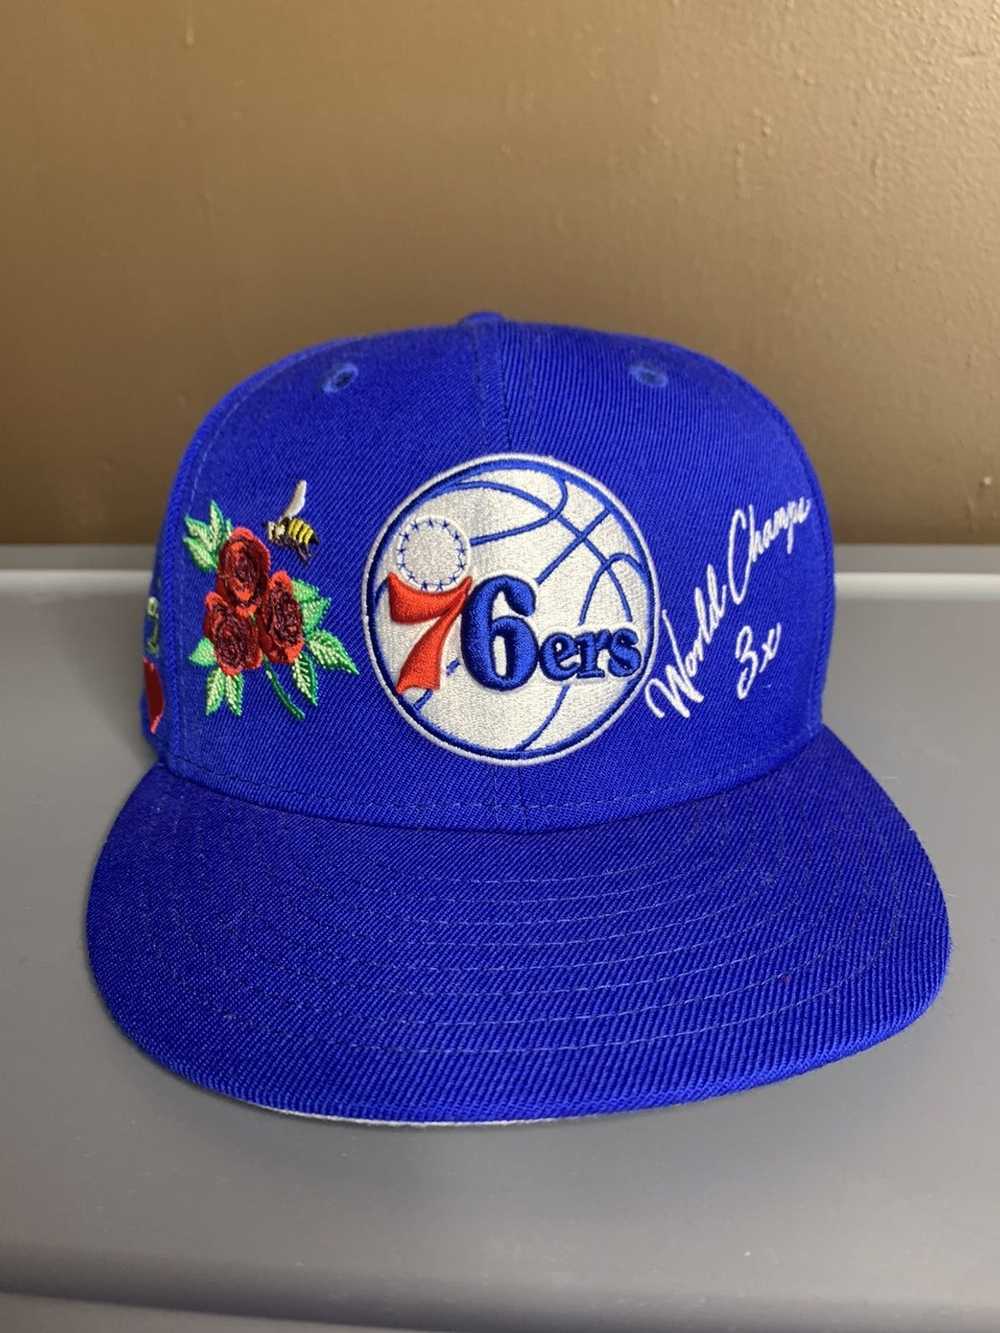 New Era 76ers New era Fitted hat - image 1